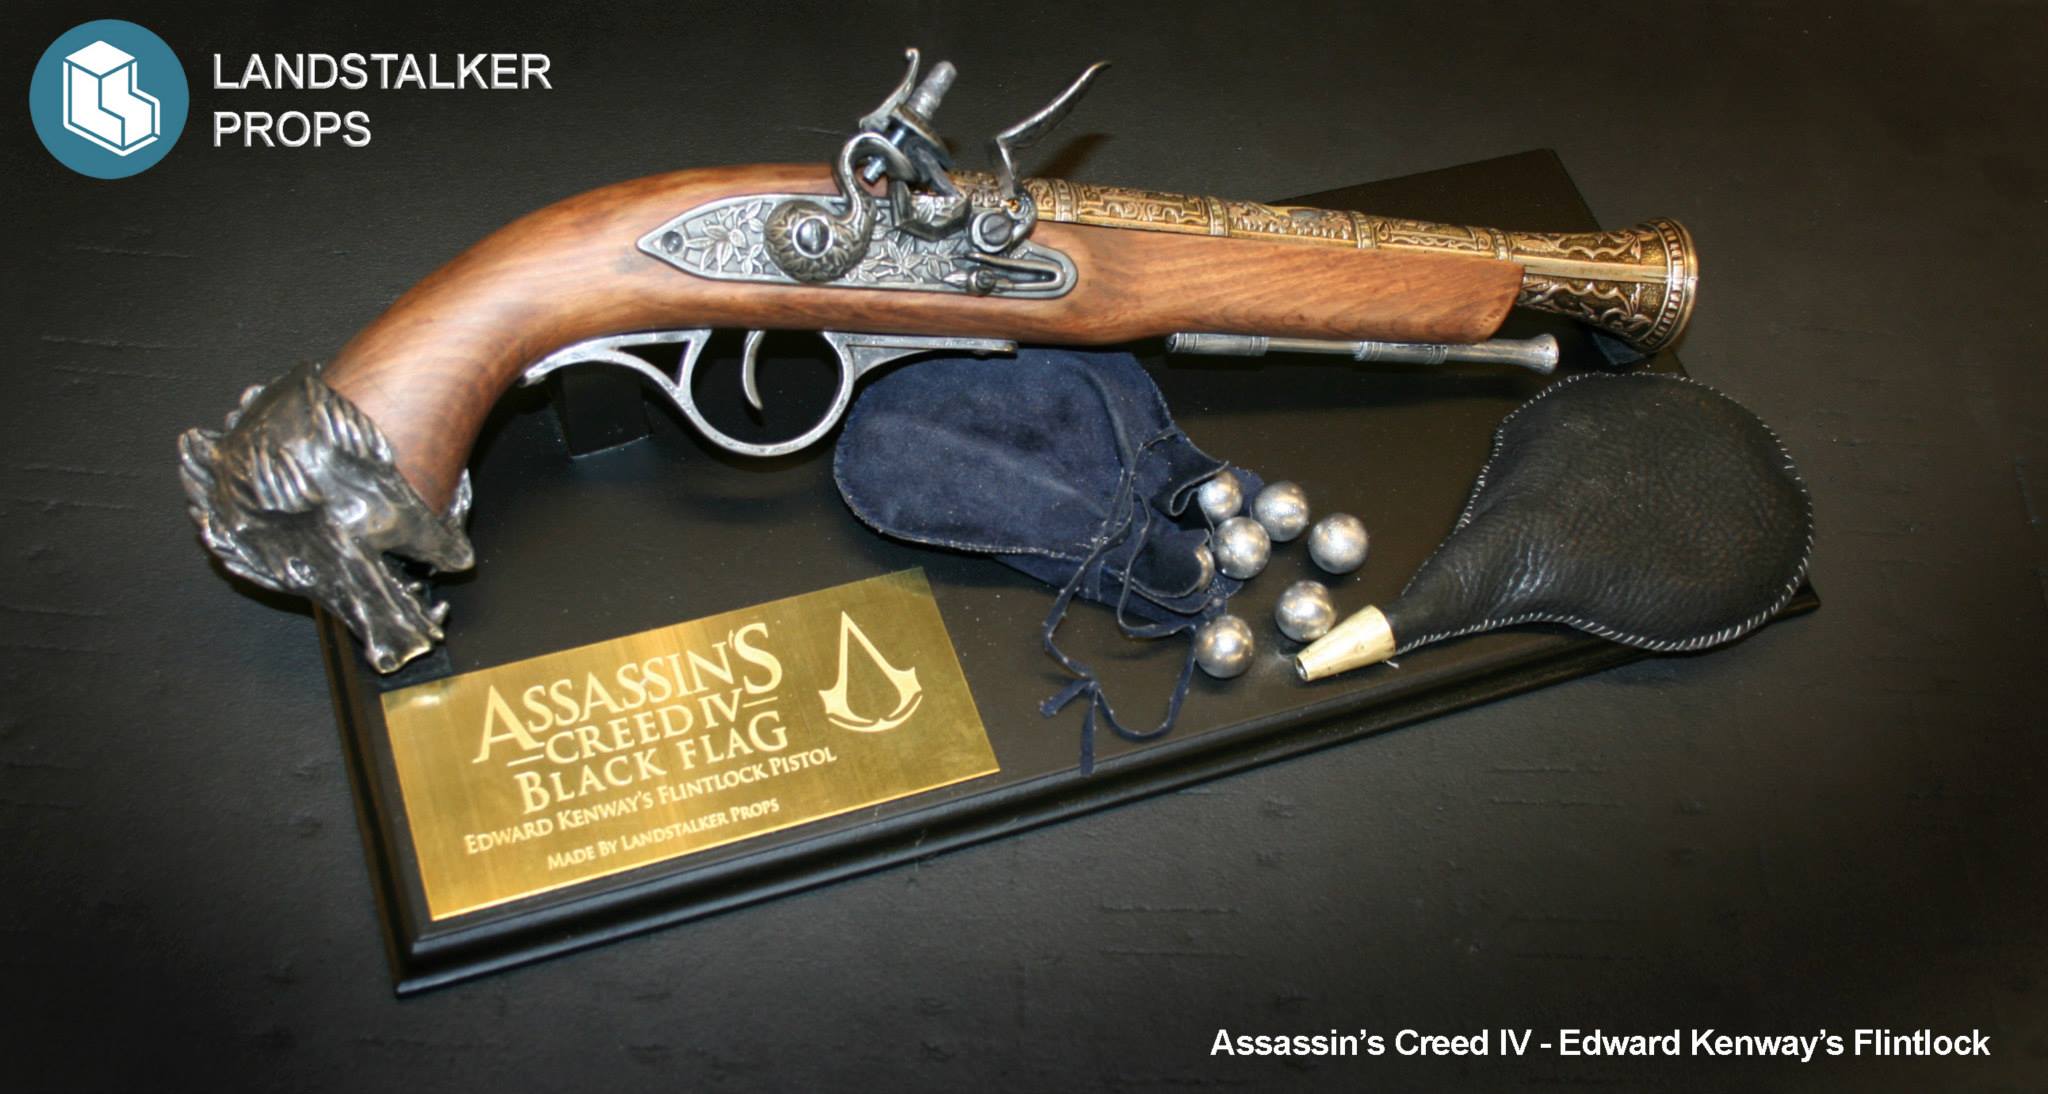 He Made Assassin’s Creed’s Pistol, But Didn’t Shoot Anyone With It